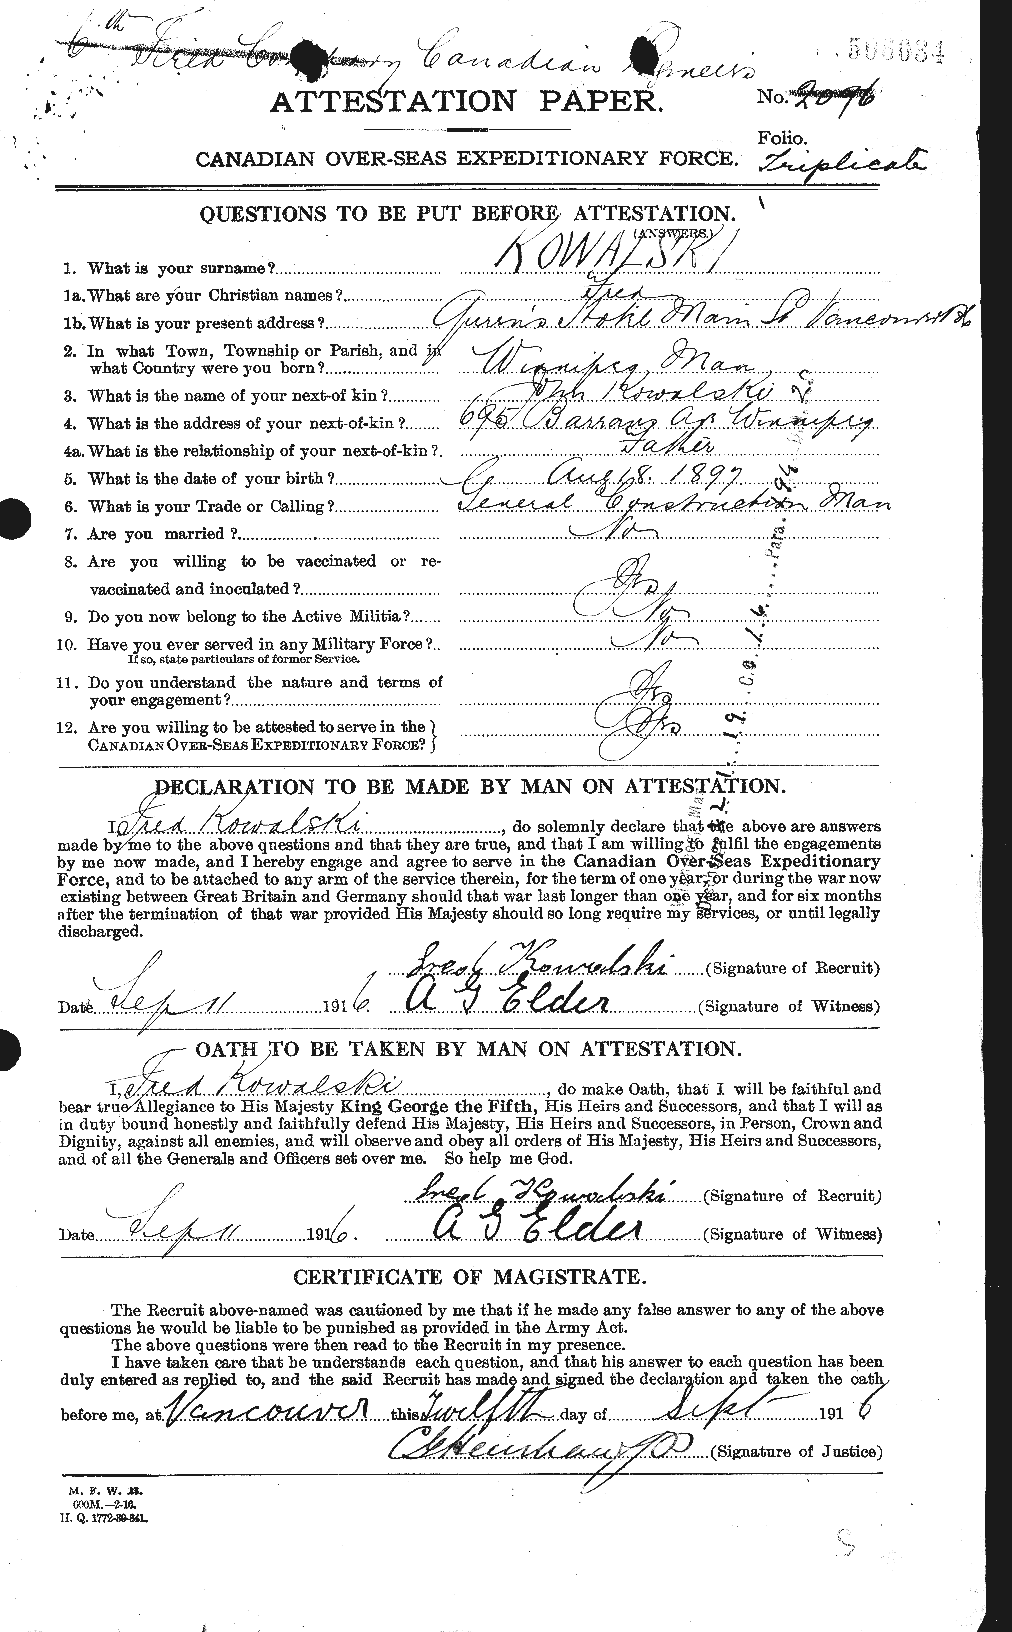 Personnel Records of the First World War - CEF 444014a